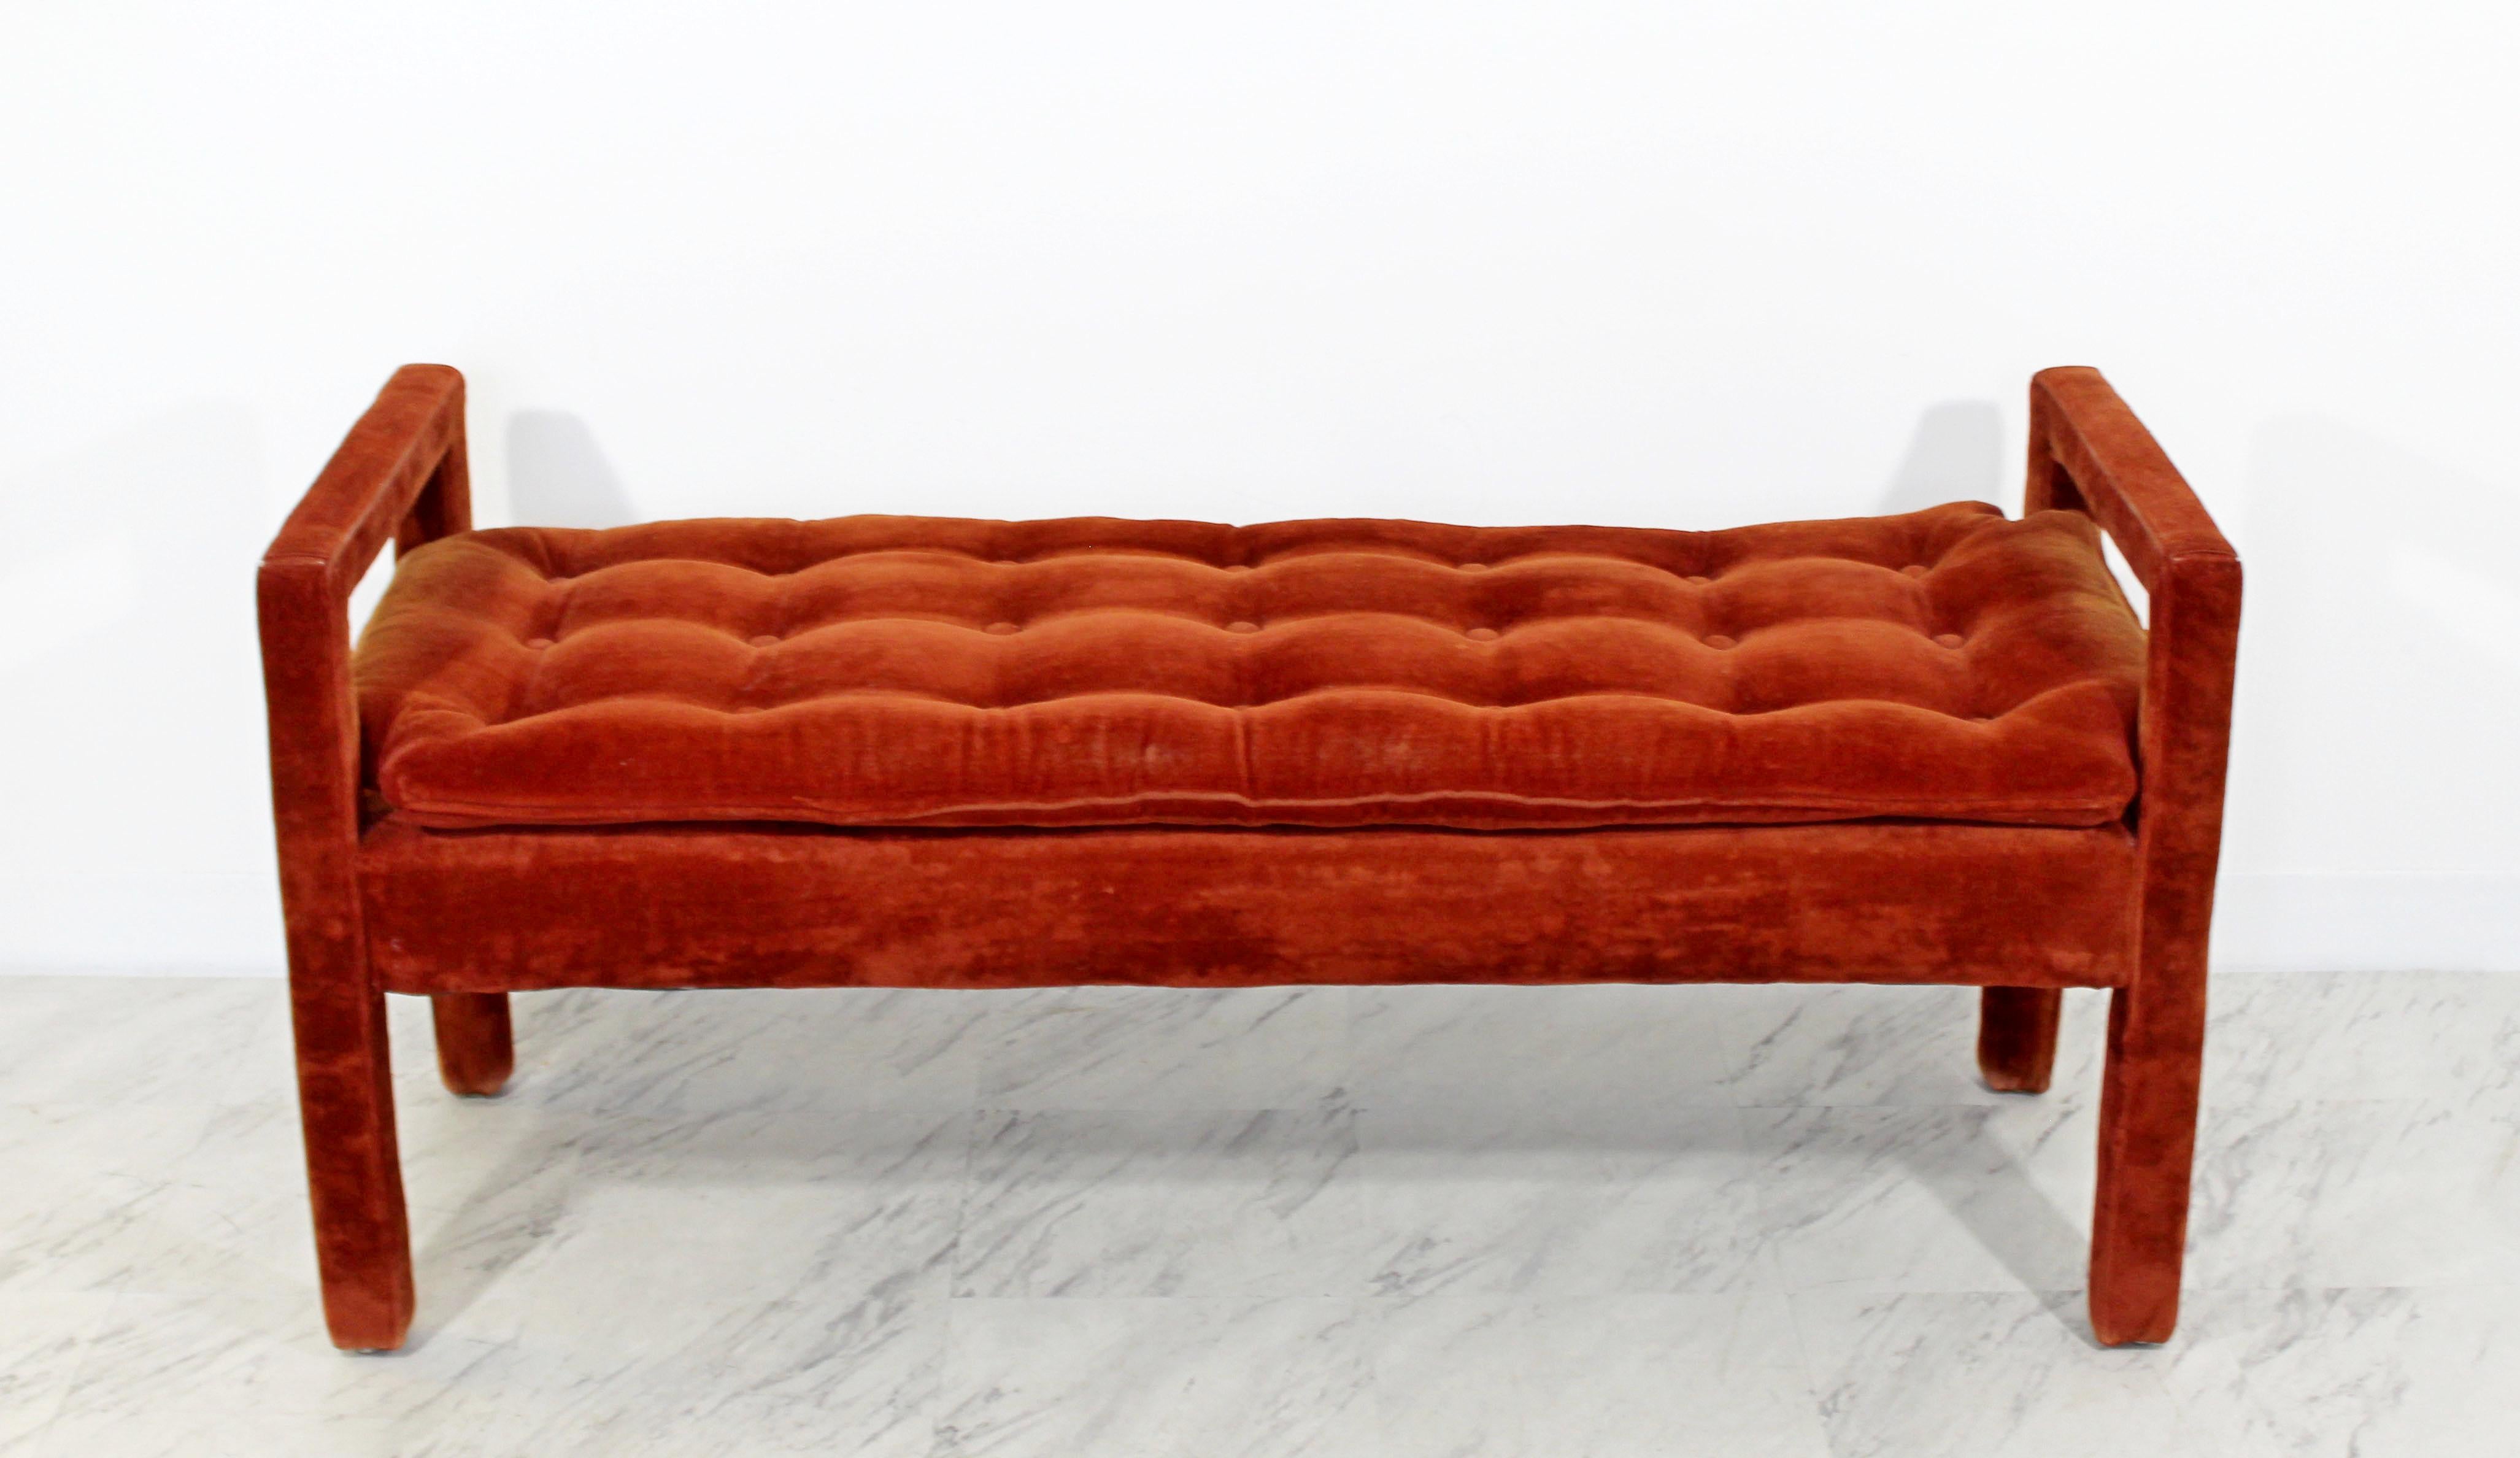 For your consideration is a marvelous Parsons tufted bench, by Milo Baughman, circa the 1960s. In very good vintage condition. The dimensions are 51